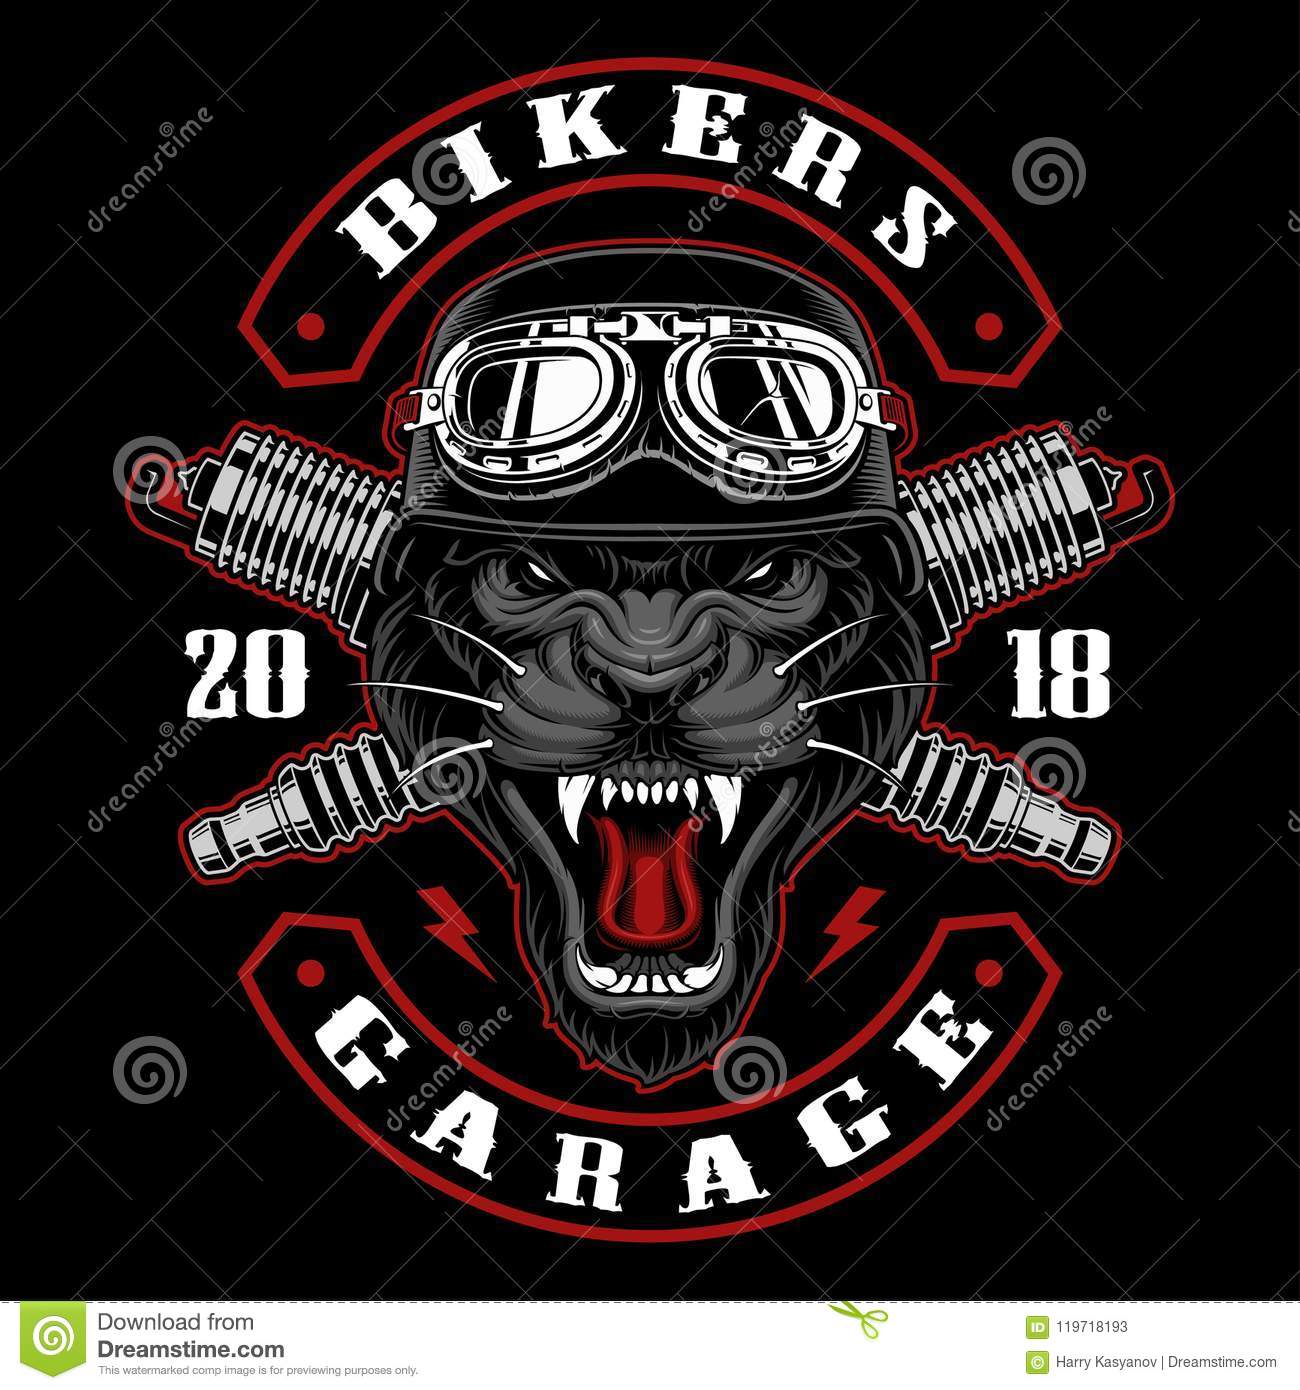 Design A Motorcycle Club Patch Download Free Software